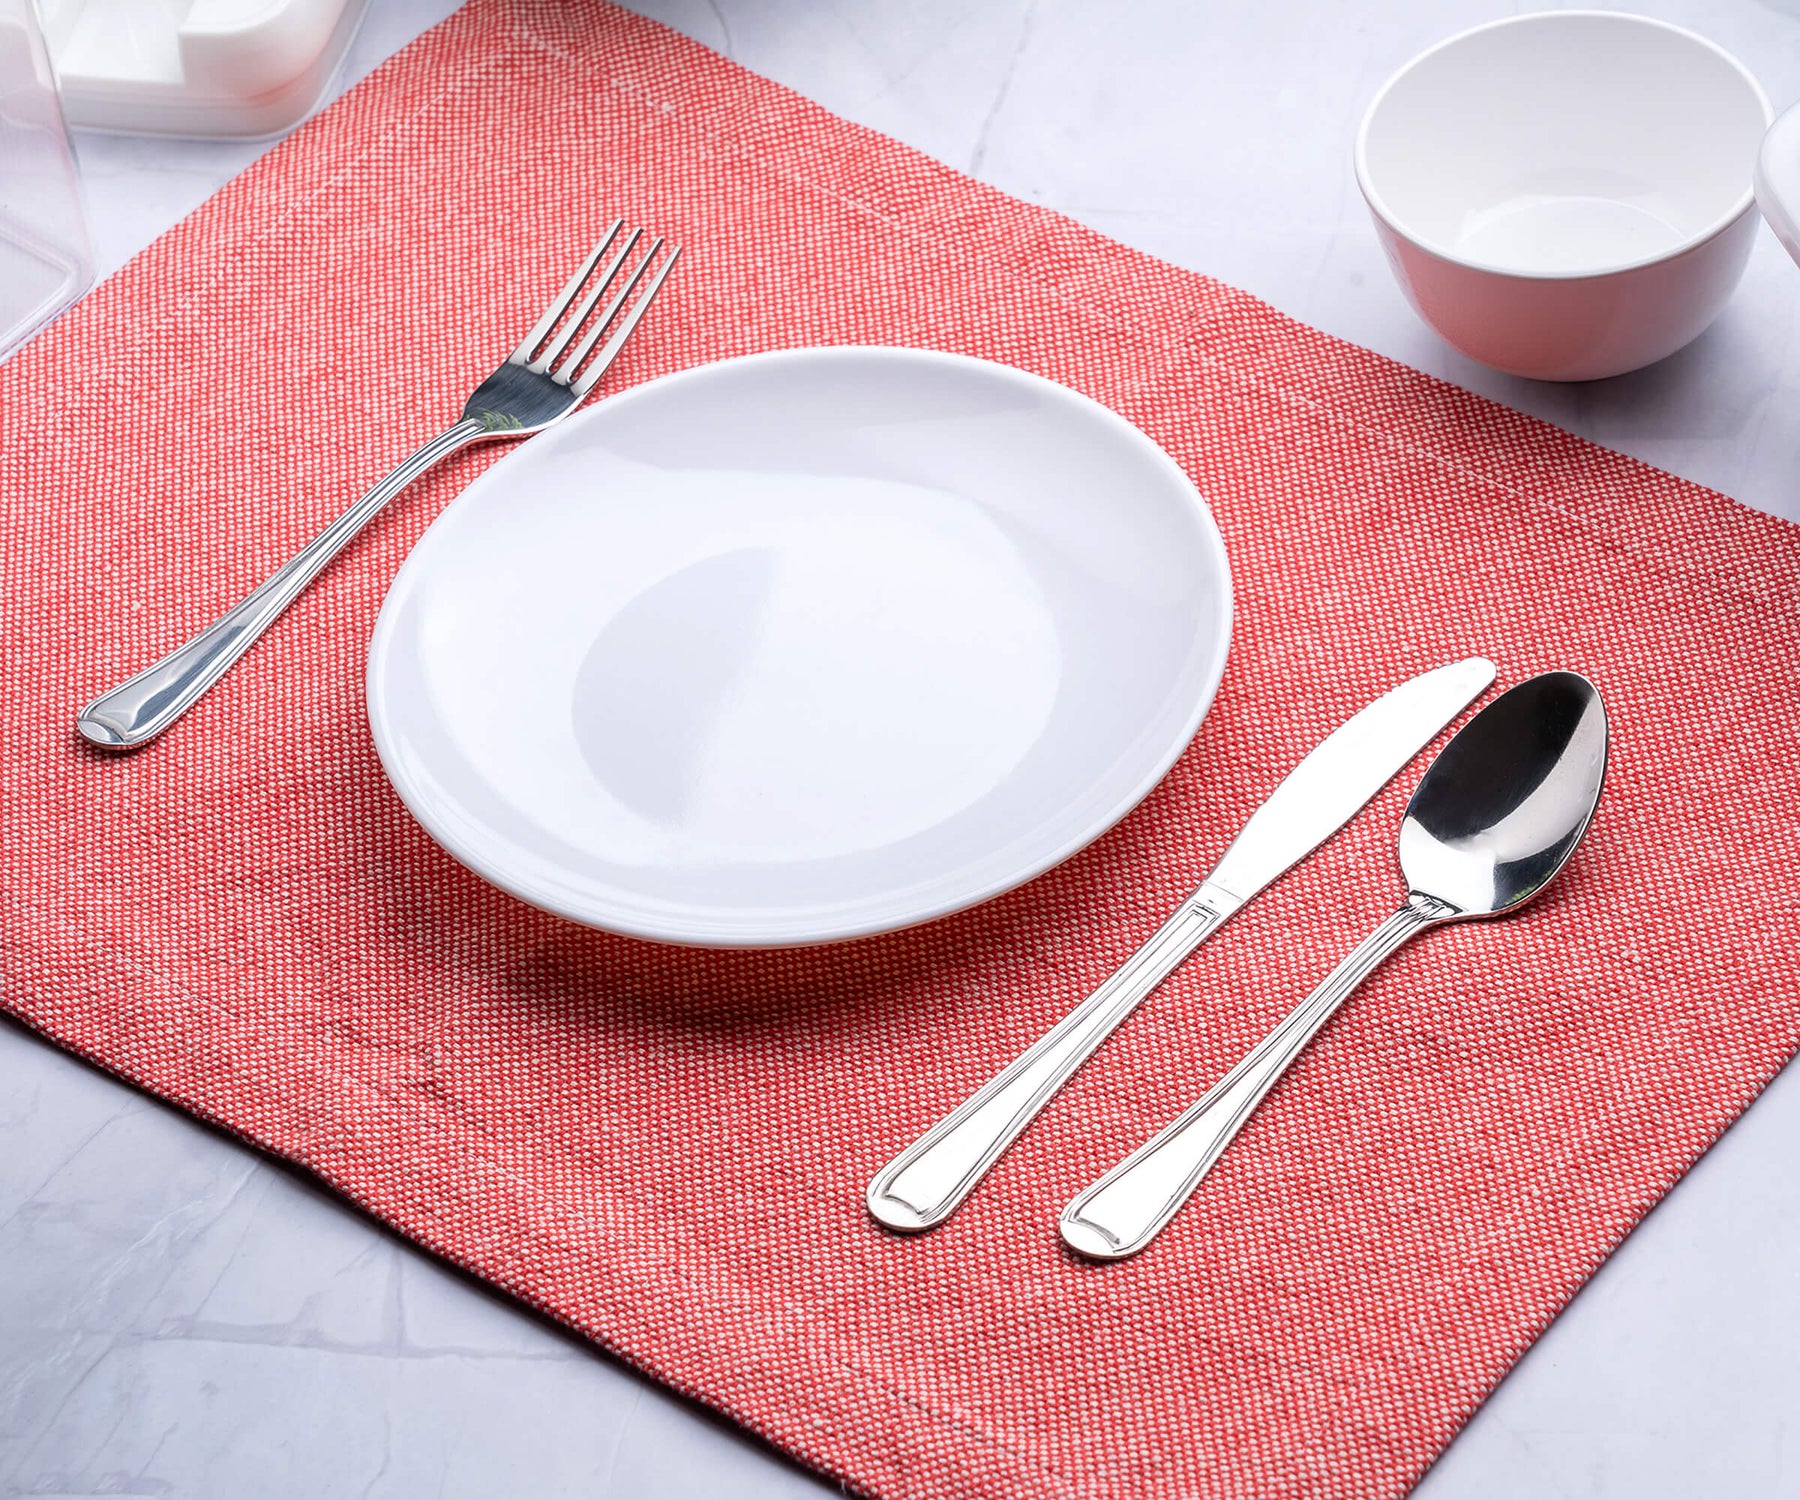 Red Orange Placemats - cotton placemats set of 6 are place don the table with plate and spoon.